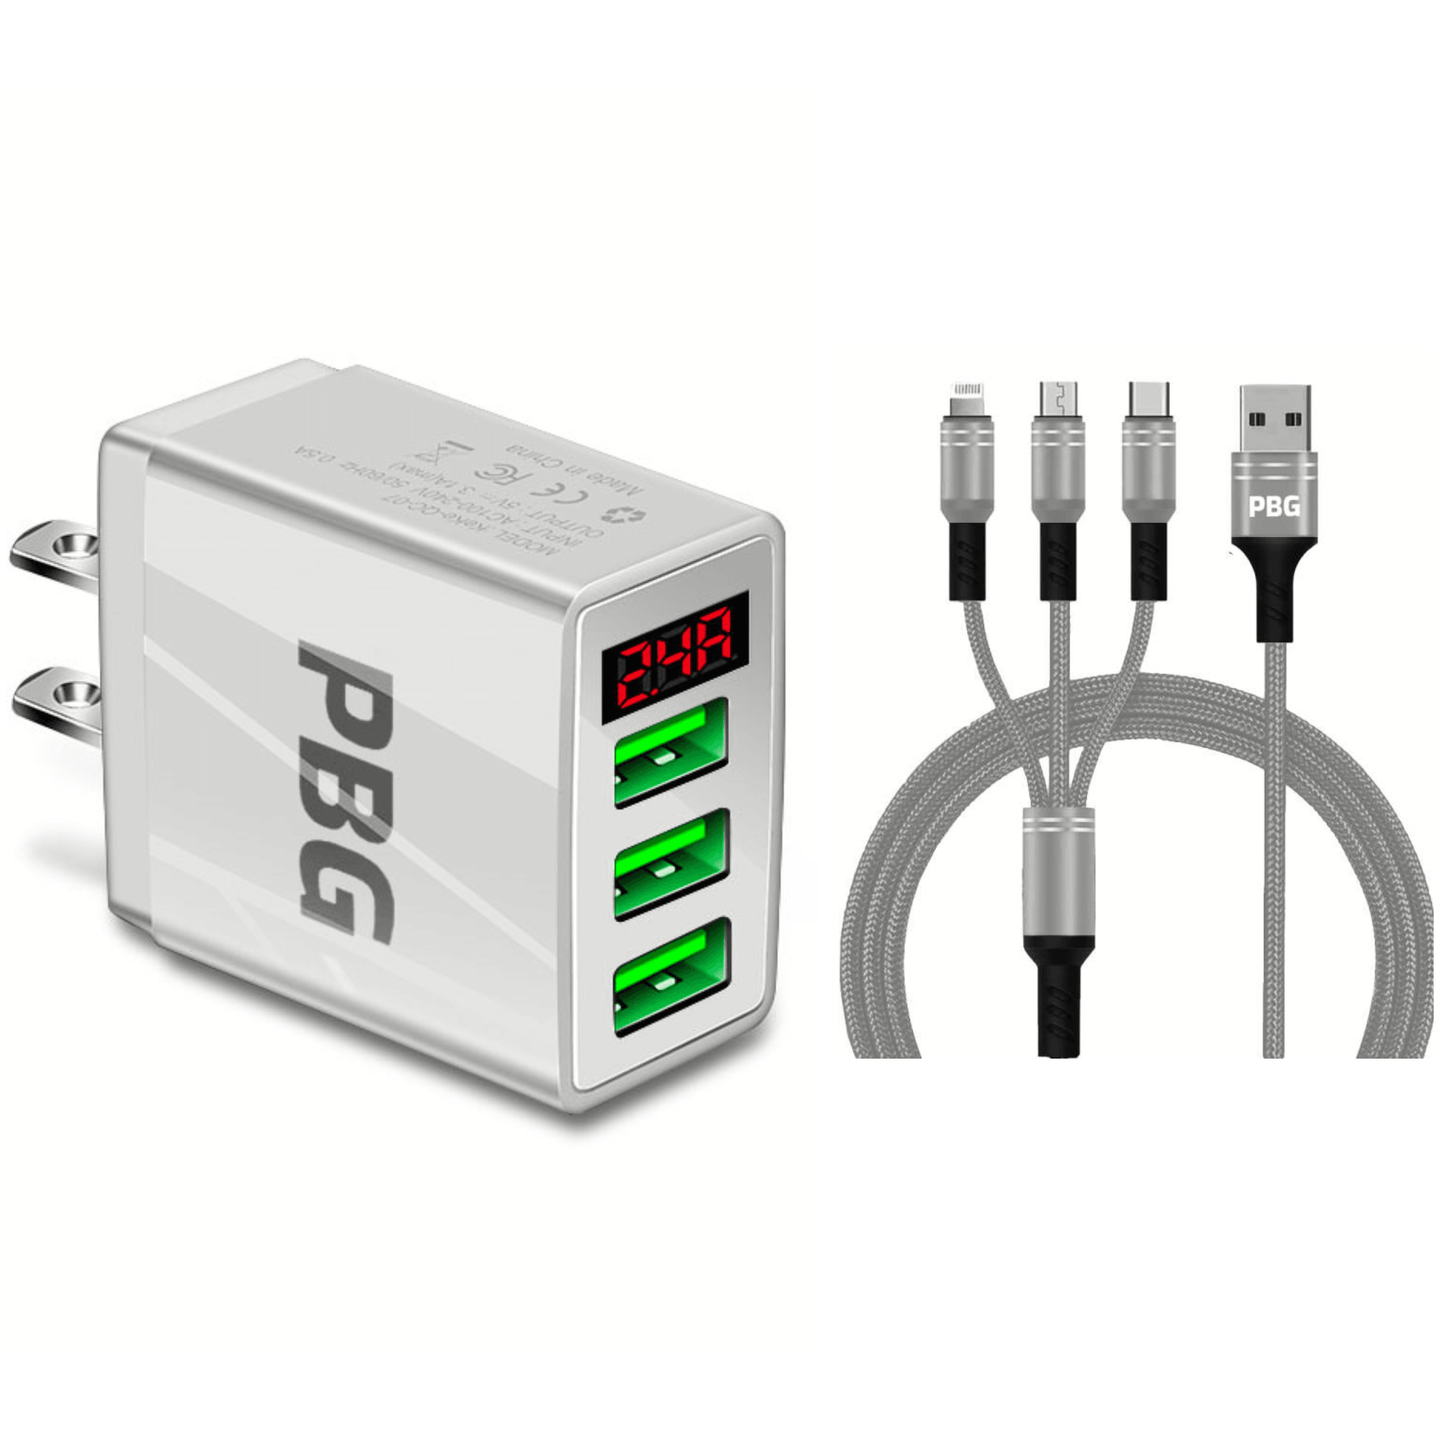 PBG 3 port LED Display Wall Charger and 3 in 1 Cable Bundle - PremiumBrandGoods